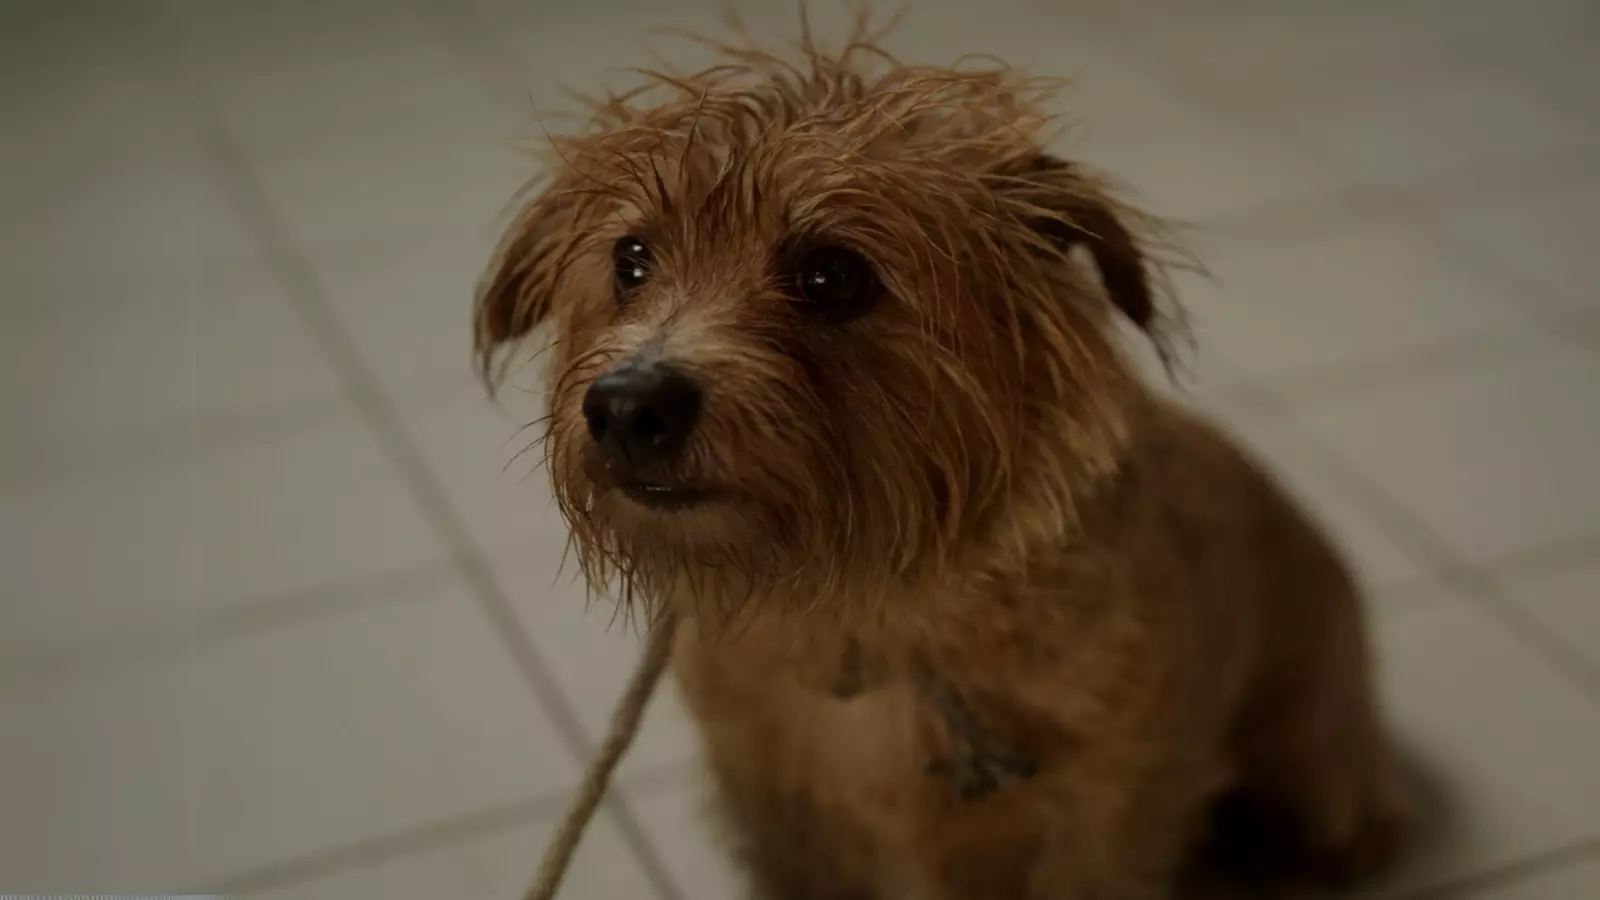 Wet looking dog with a lead and very sad eyes